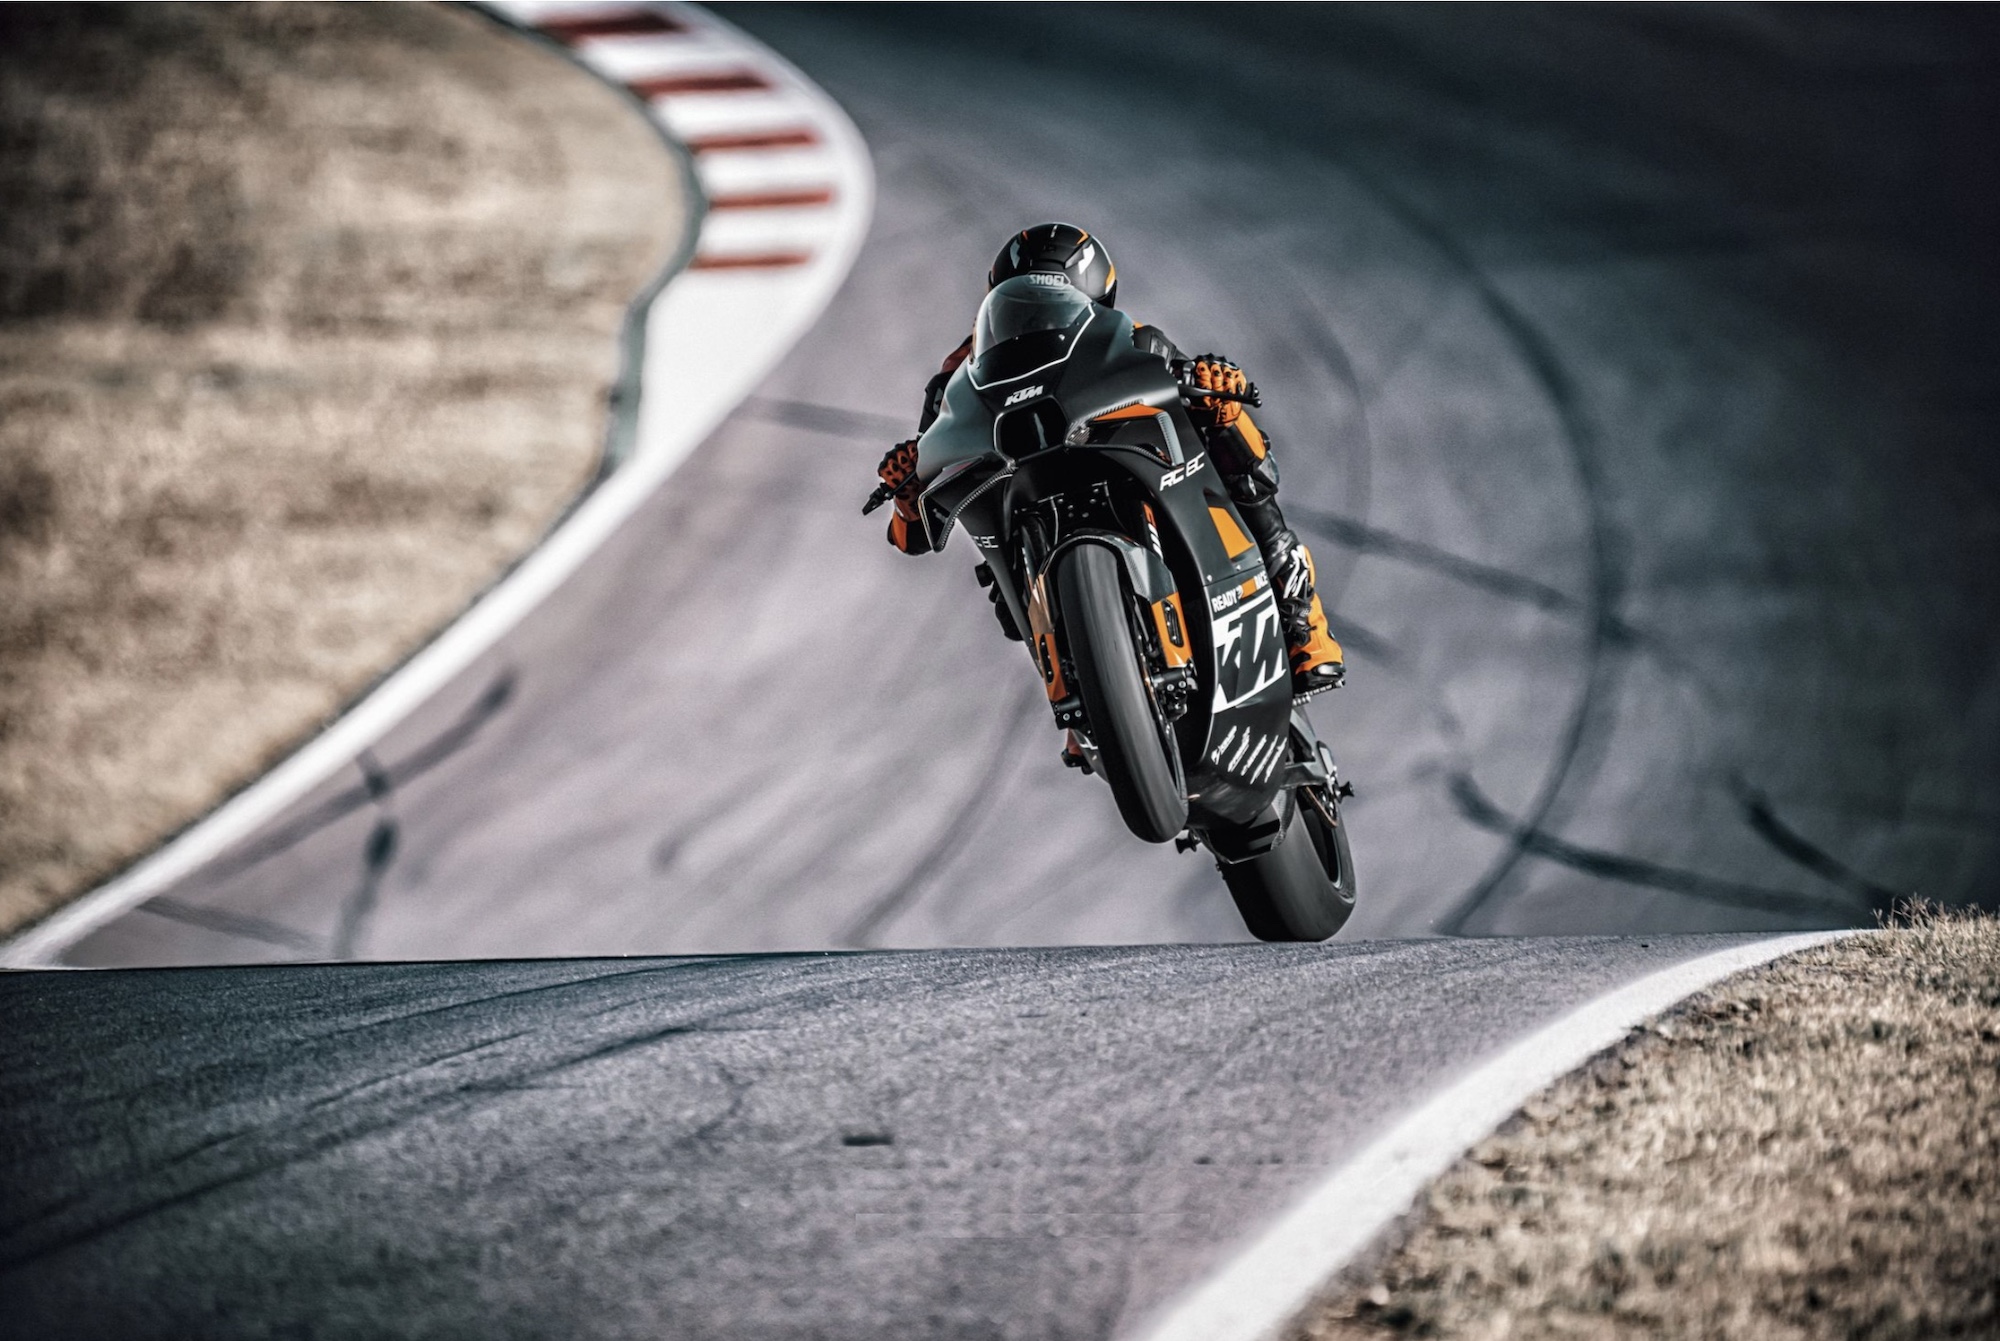 A rider on a track-focused KTM motorcycle.